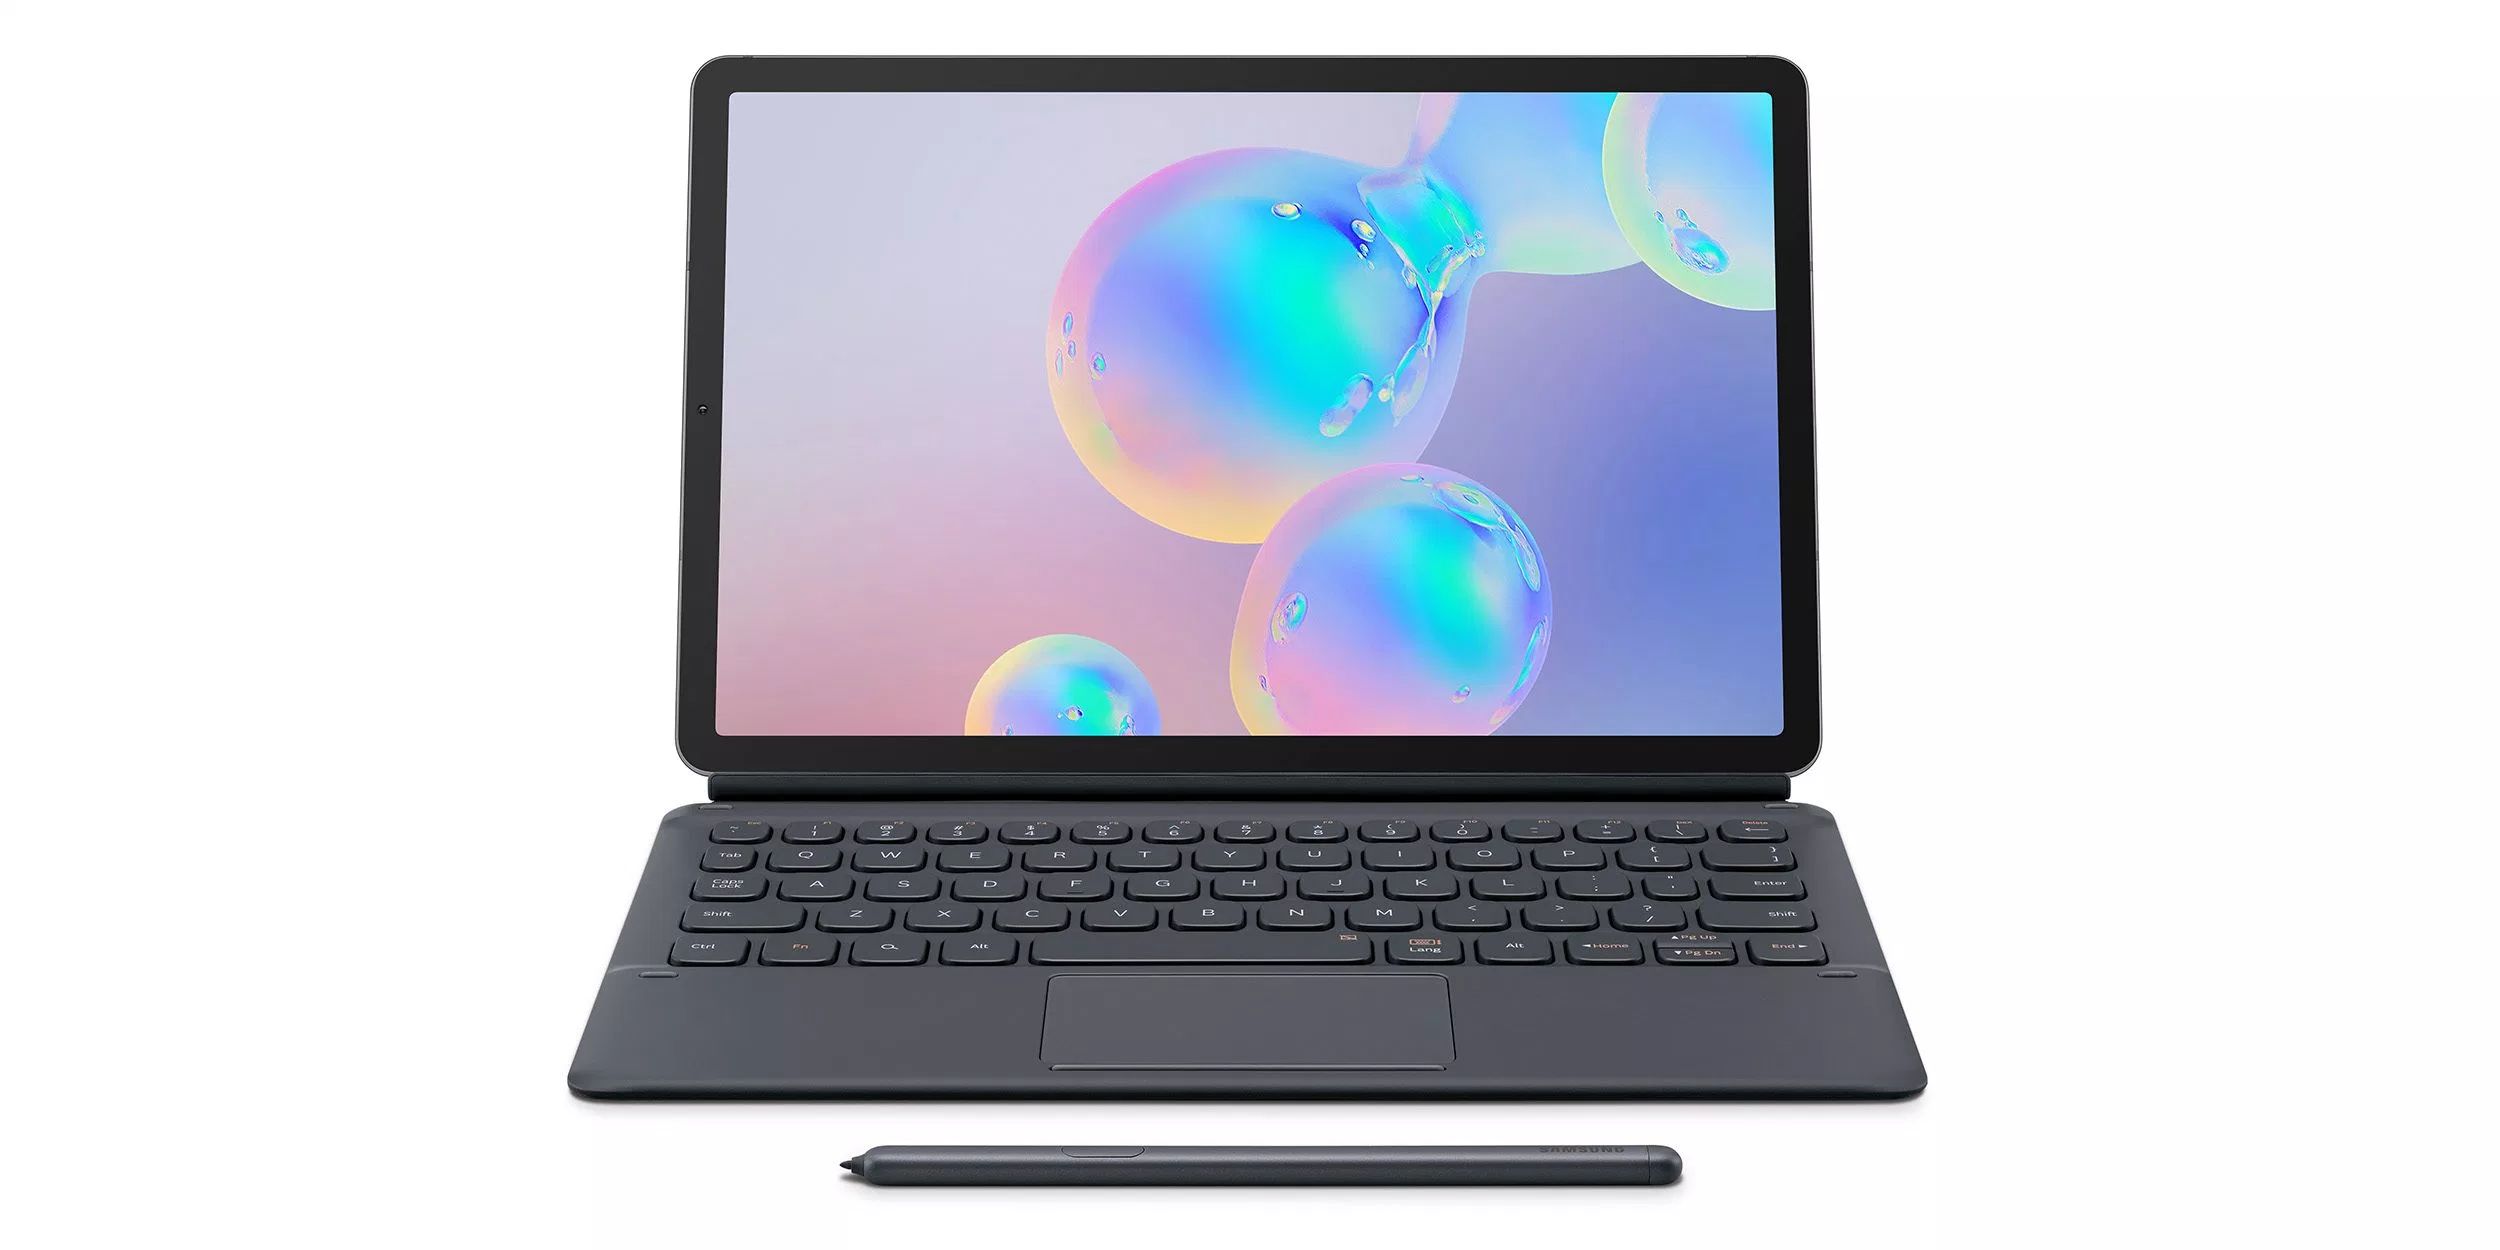 Samsung Galaxy Tab S6 launched with S Pen and Snapdragon 855 chip